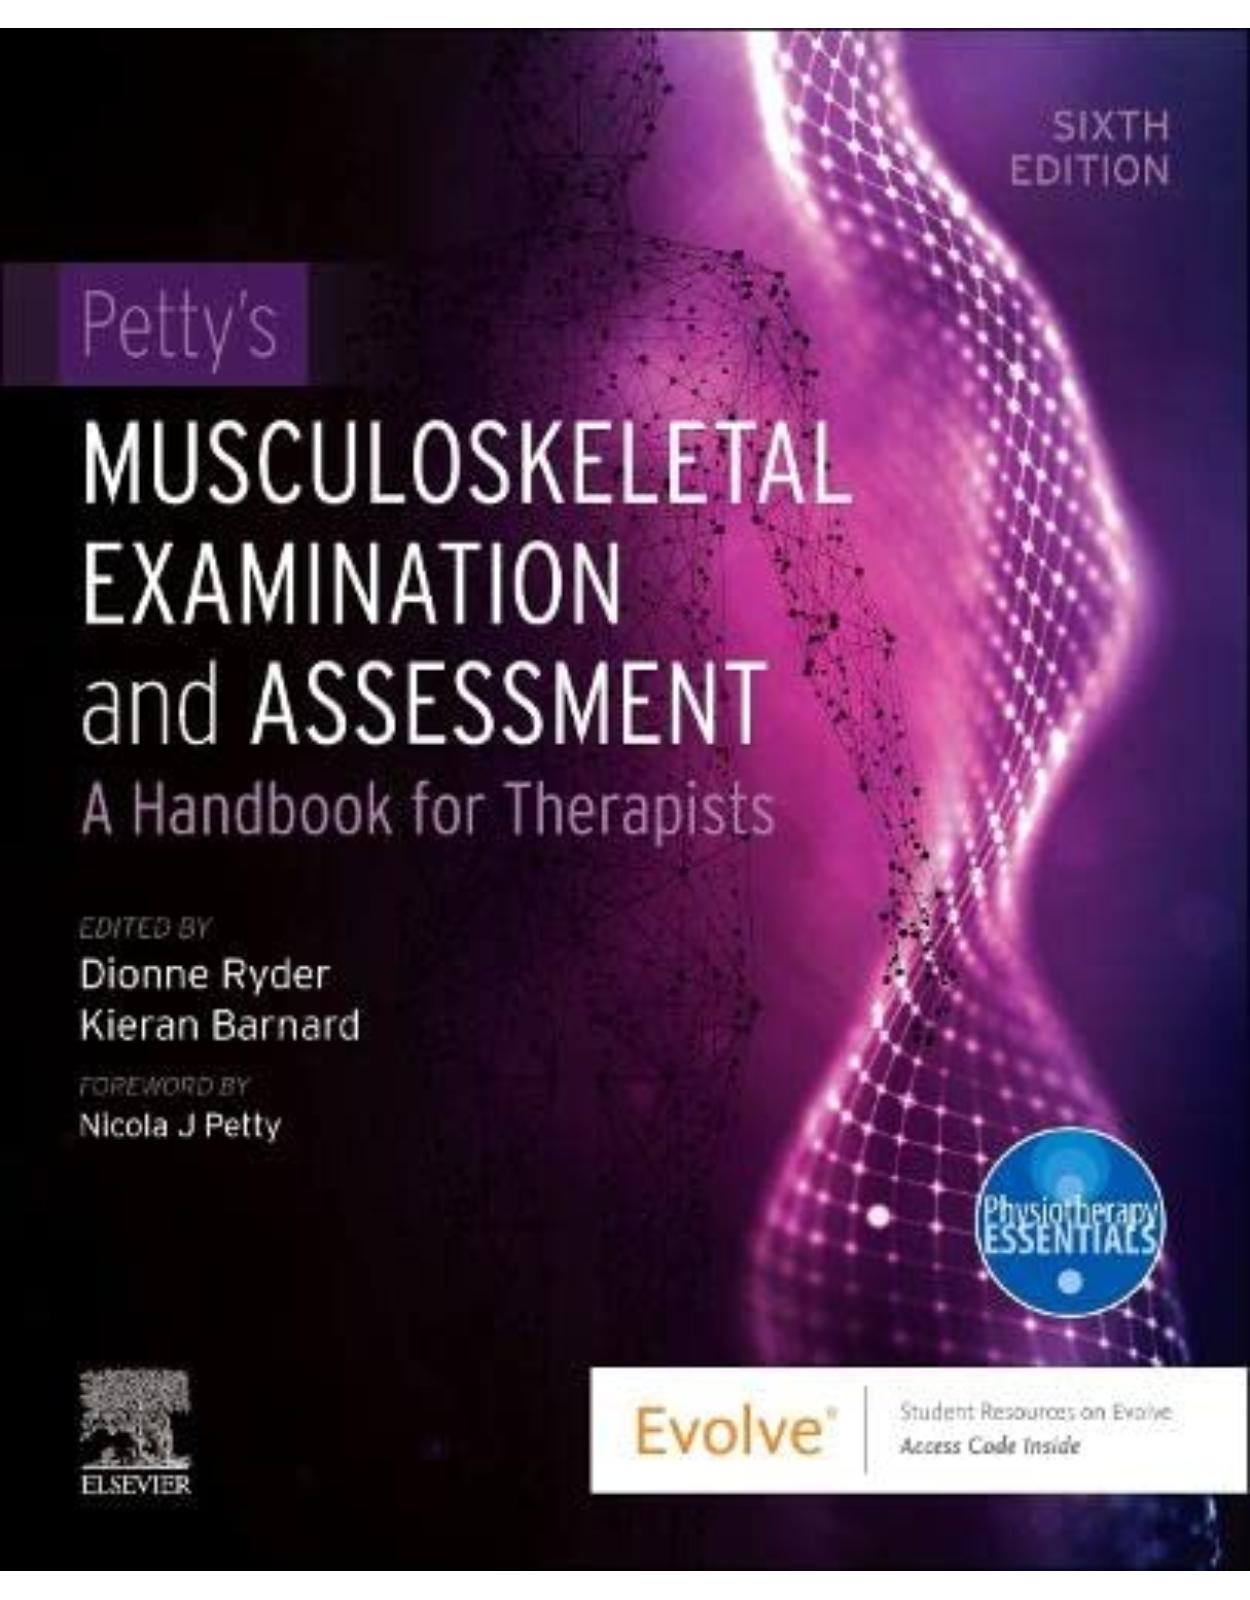 Petty's Musculoskeletal Examination and Assessment: A Handbook for Therapists